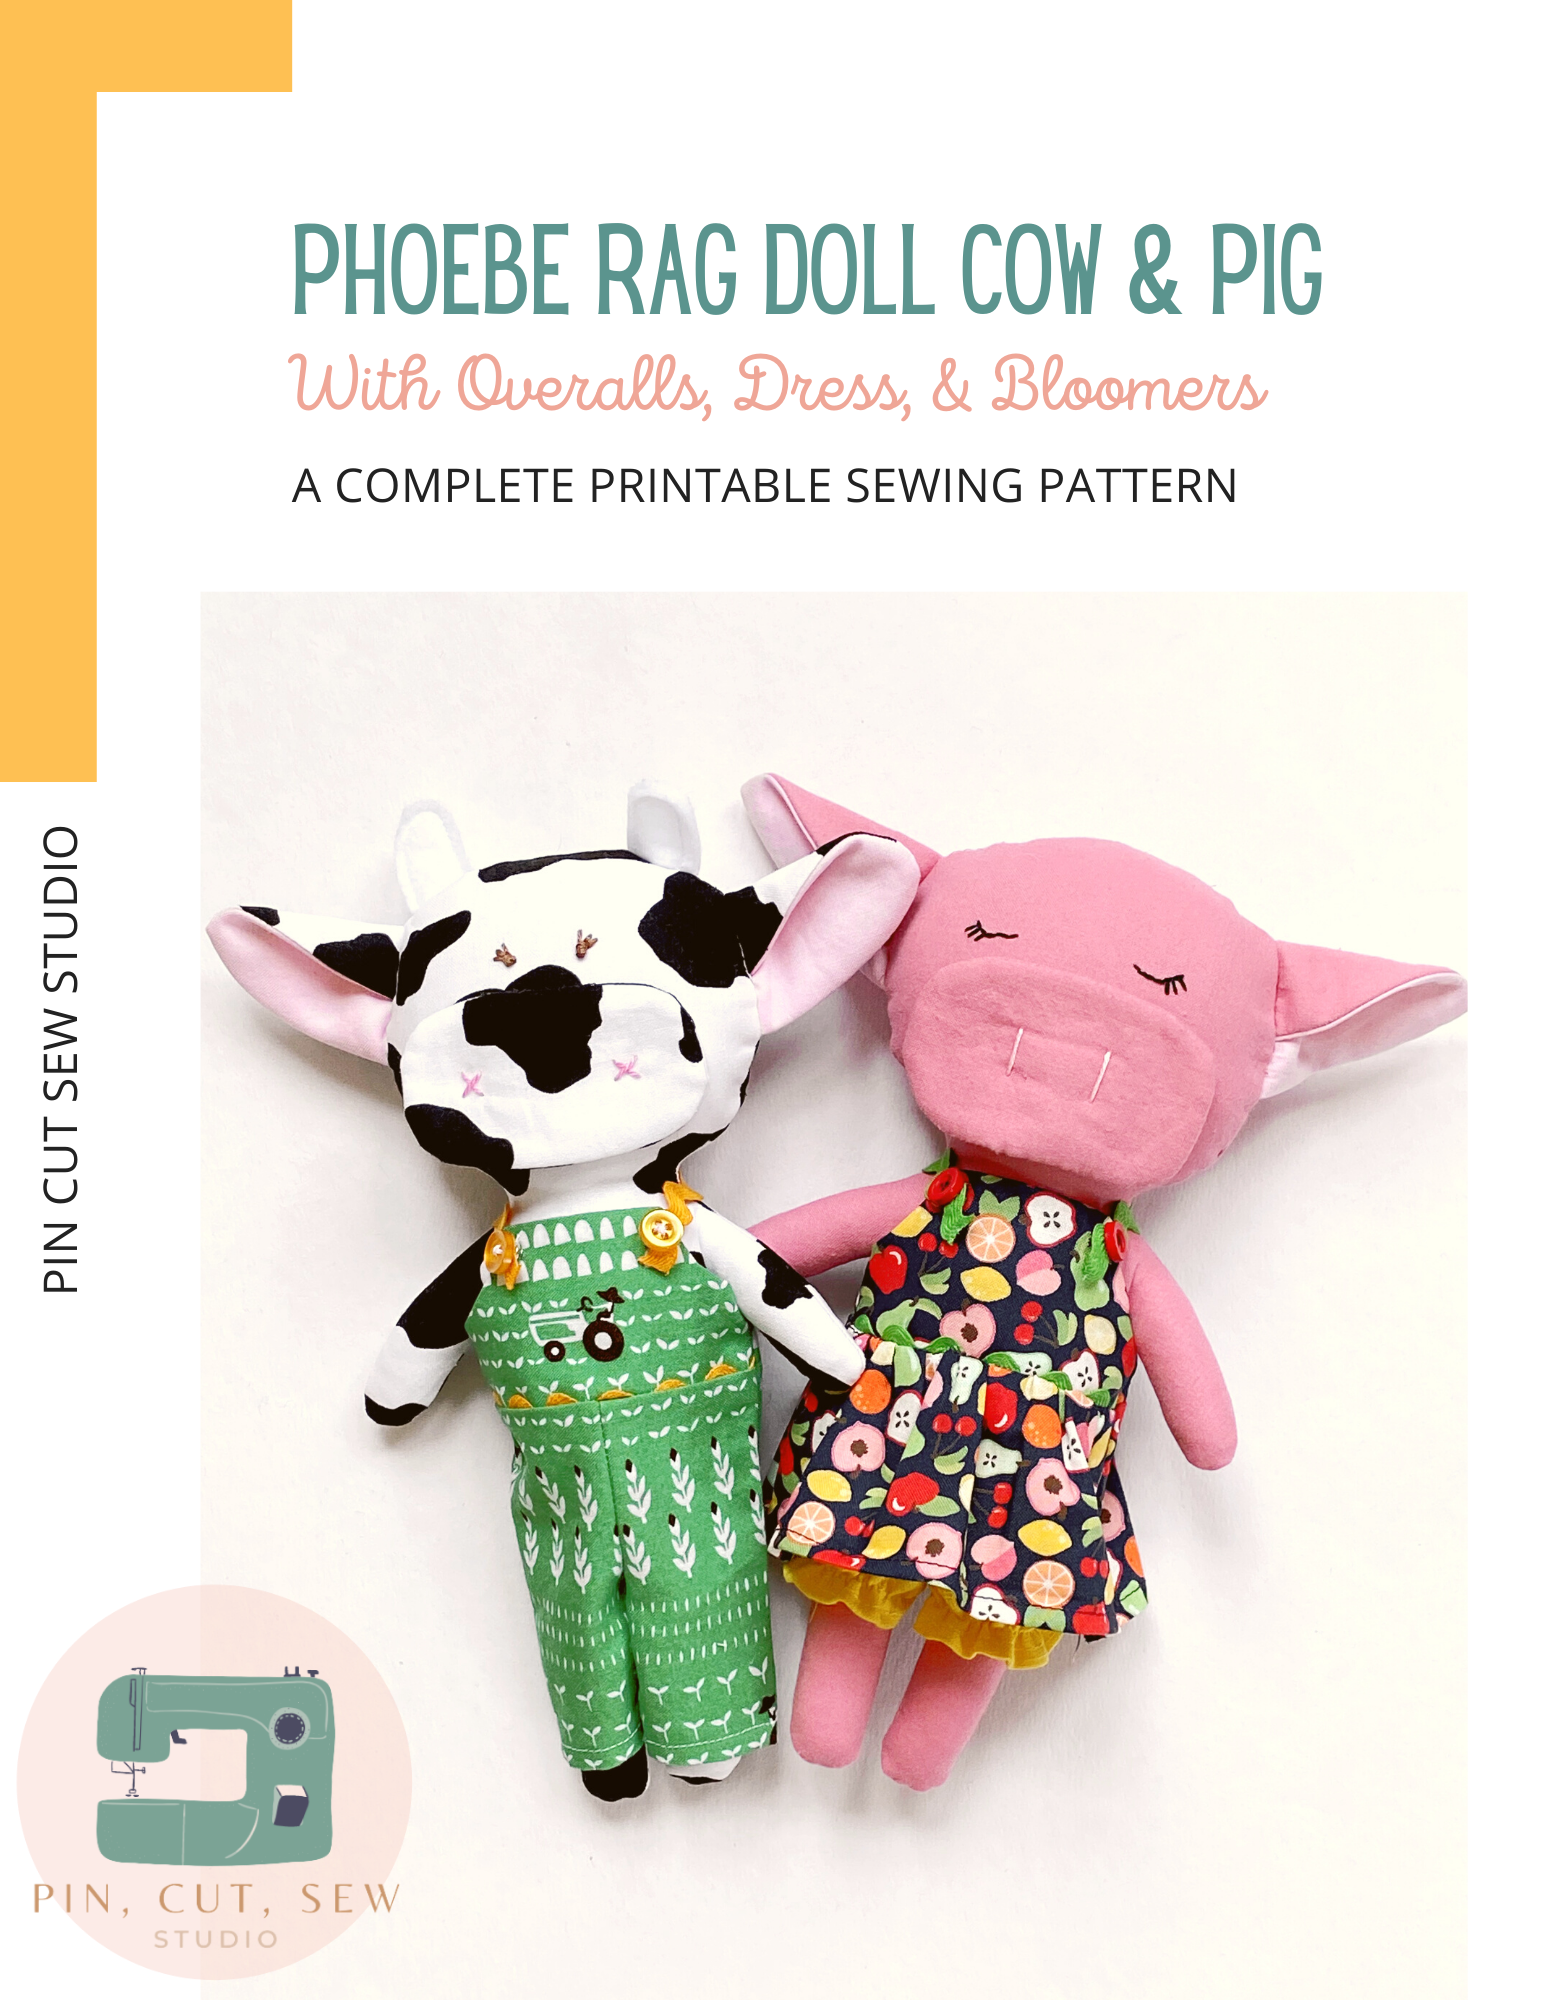 Animal Rag Doll Sewing Pattern: Cow & Pig with Clothes — Pin, Cut, Sew  Studio